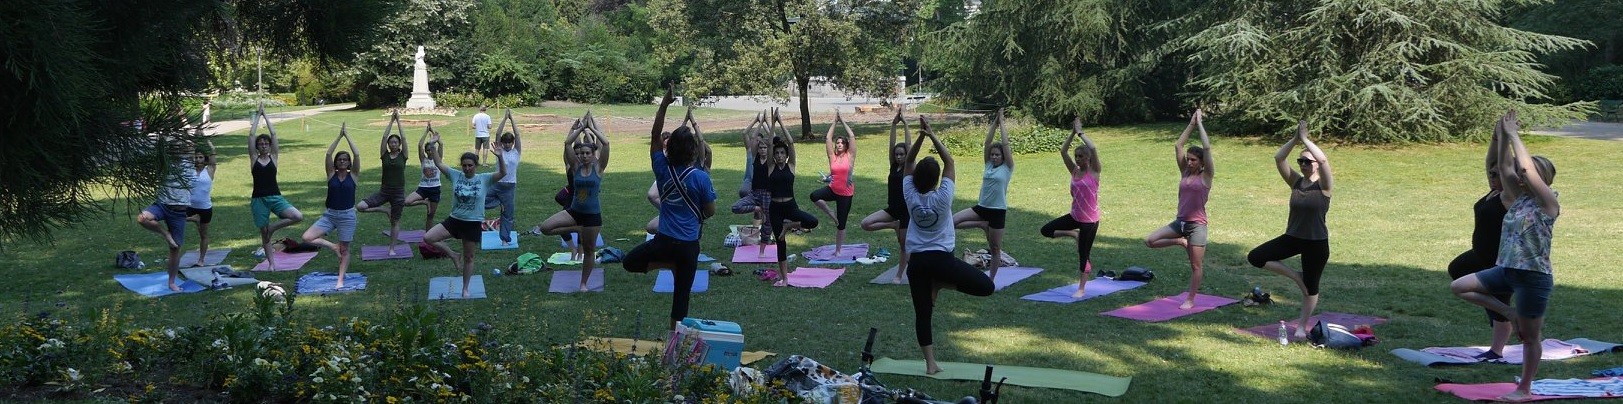 Tours: Masterclass - from a healthy body to a peaceful mind